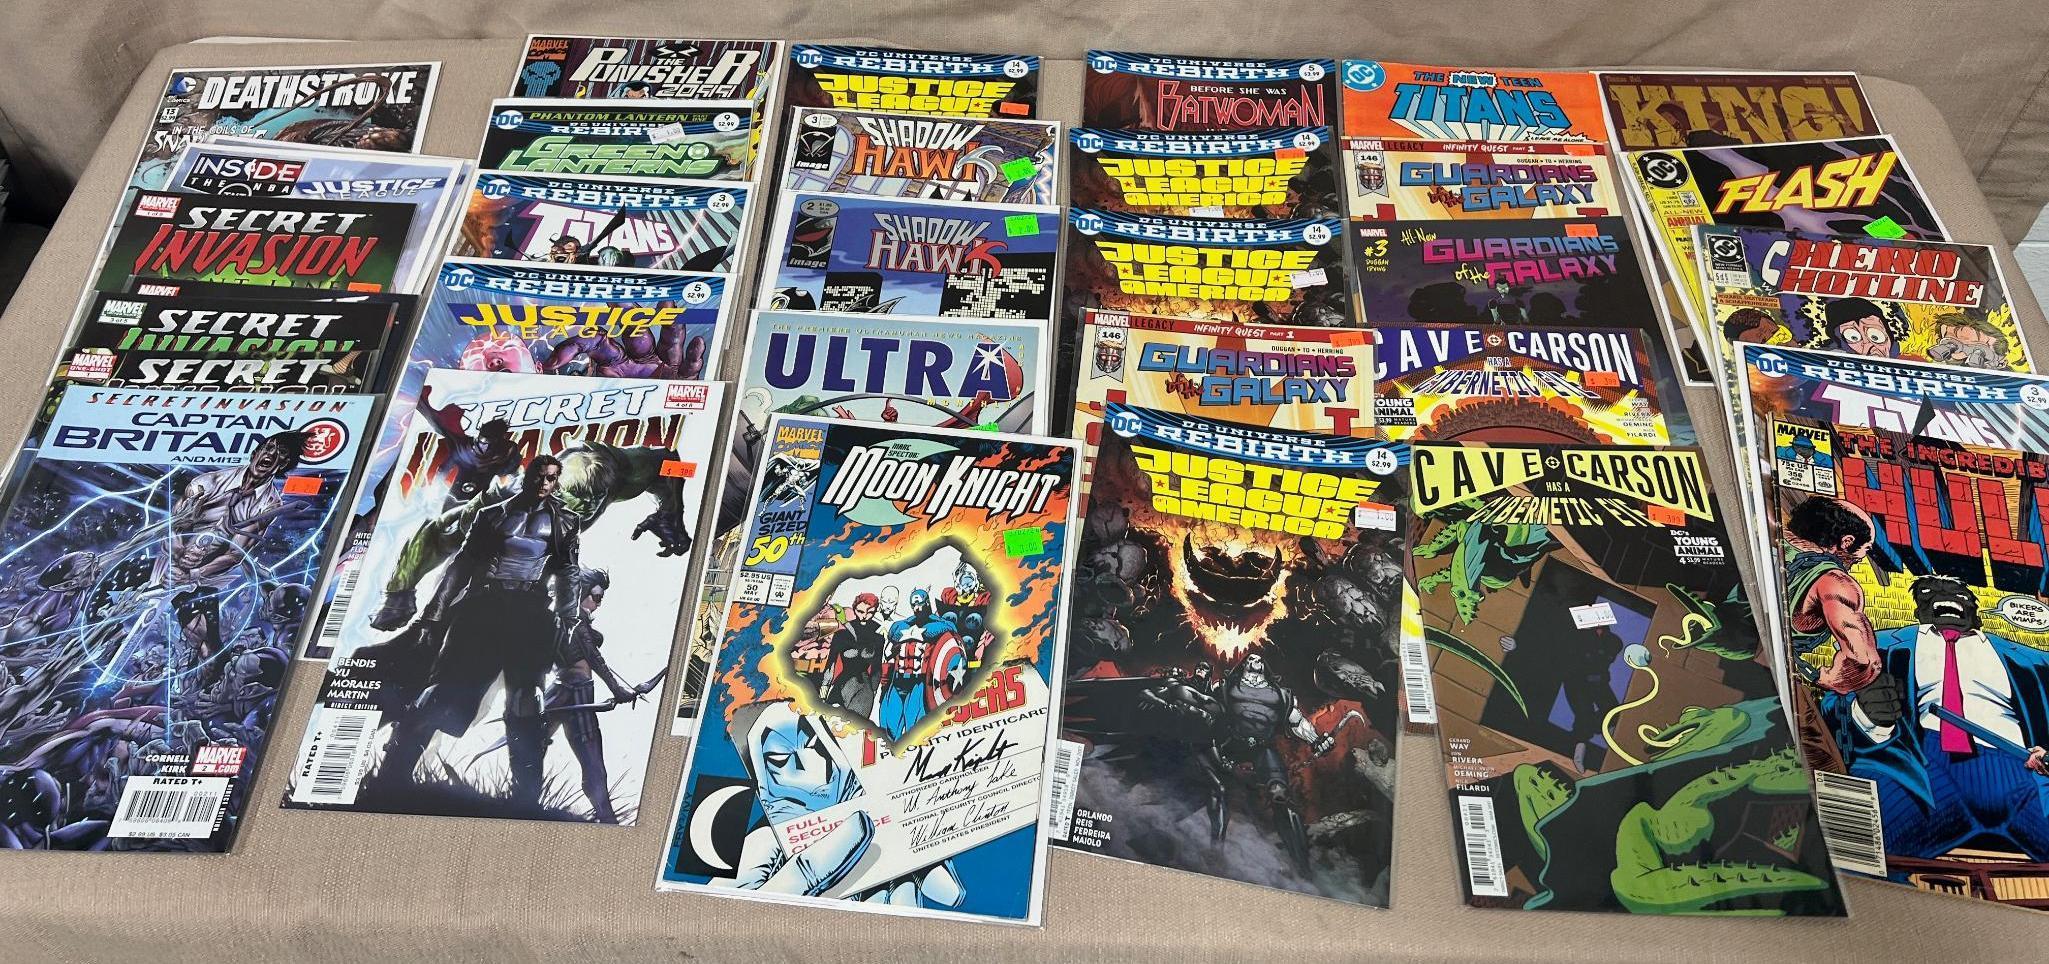 30+ Asst. Comic Books, see pics for comics included